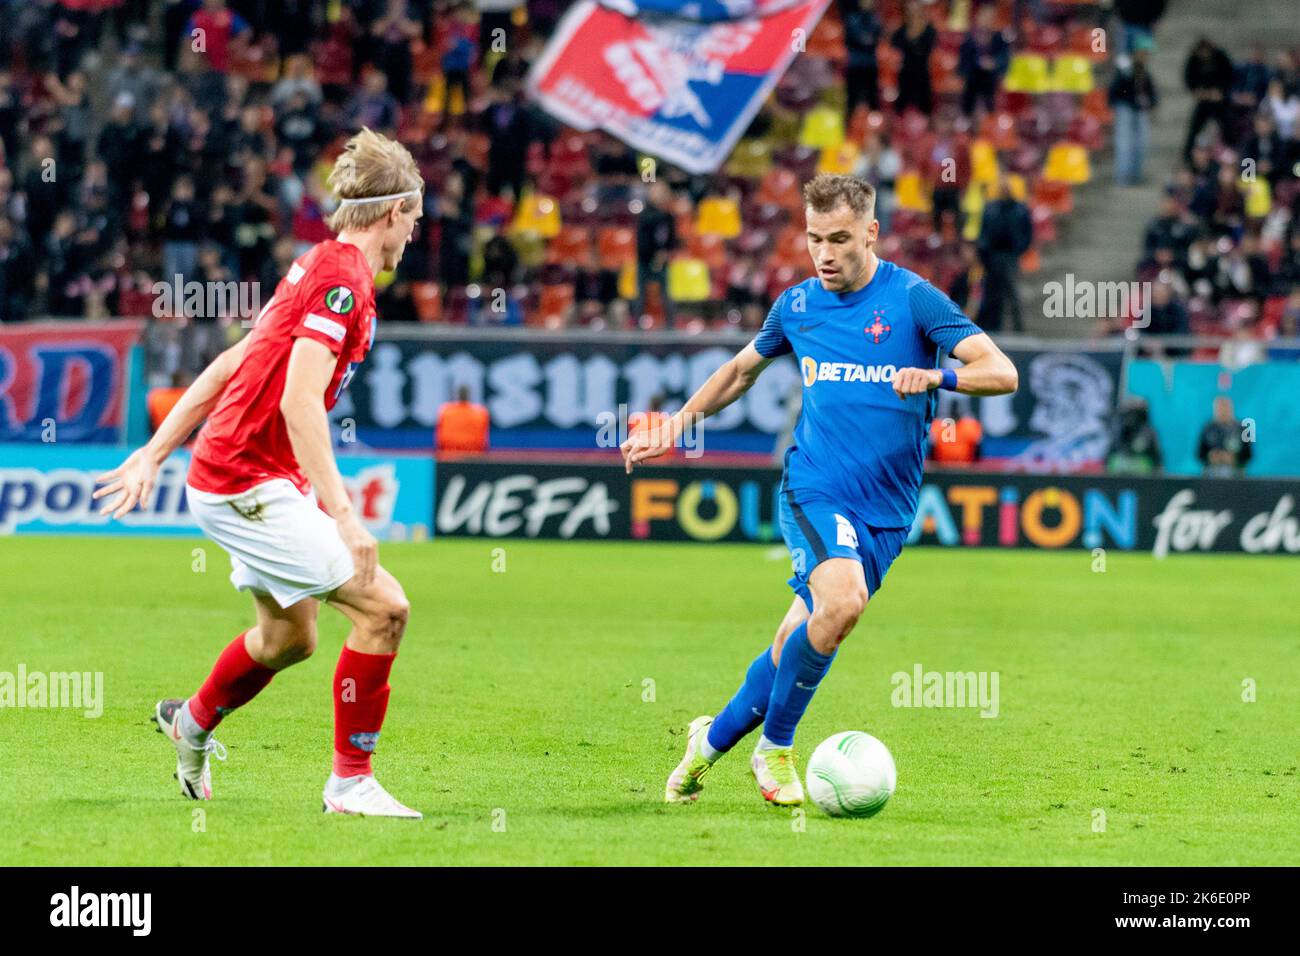 Bucharest, Romania. 13th Oct, 2022. October 13, 2022: Alexandru Pantea #28 of FCSB during of the UEFA Europa Conference League group B match between FCSB Bucharest and Silkeborg IF at National Arena Stadium in Bucharest, Romania ROU. Catalin Soare/Cronos Credit: Cronos/Alamy Live News Stock Photo